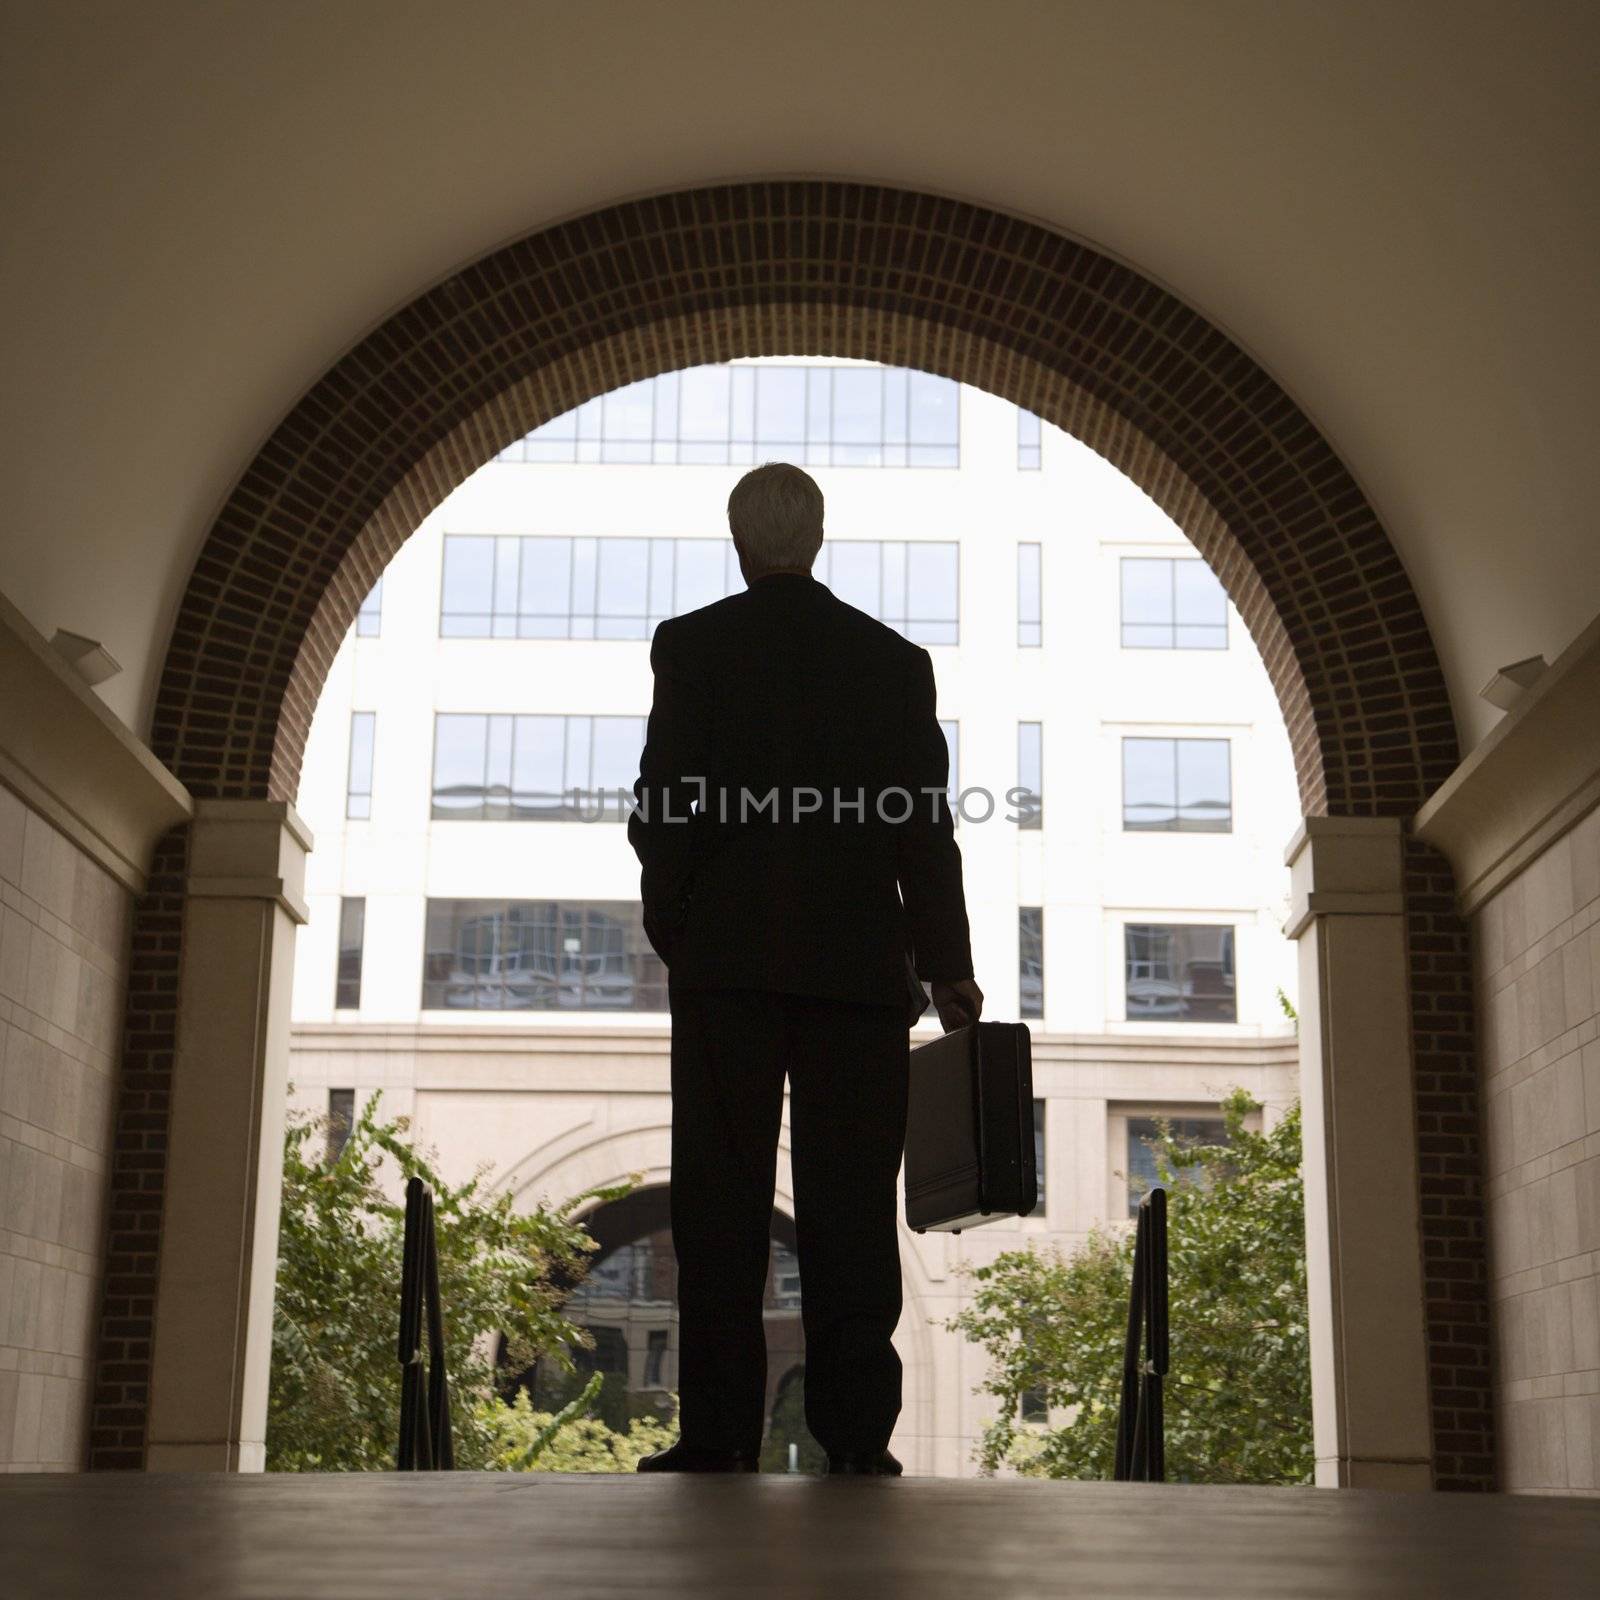 Caucasian middle aged businessman silhouette standing in archway holding briefcase.